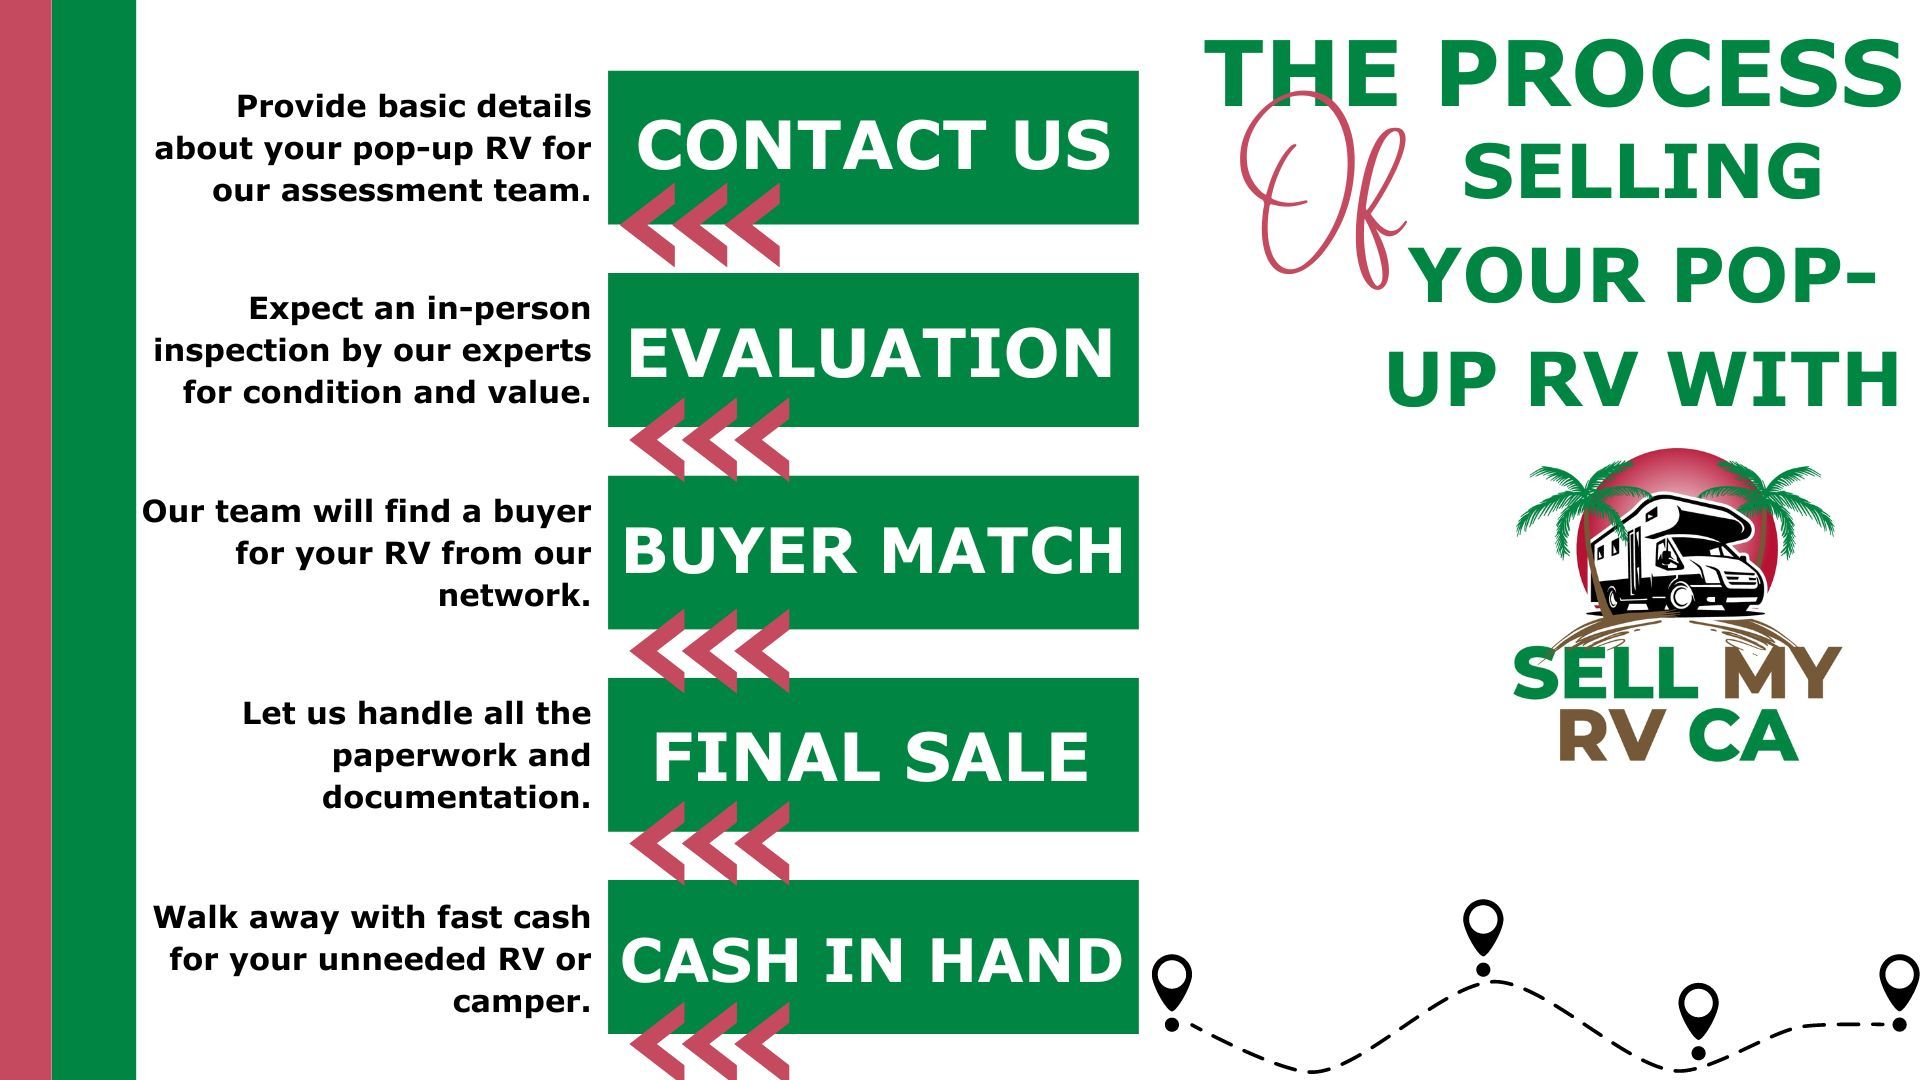 M42216 - March 2024 Infographic - The Process of Selling Your Pop Up RV With Sell My RV CA.jpg